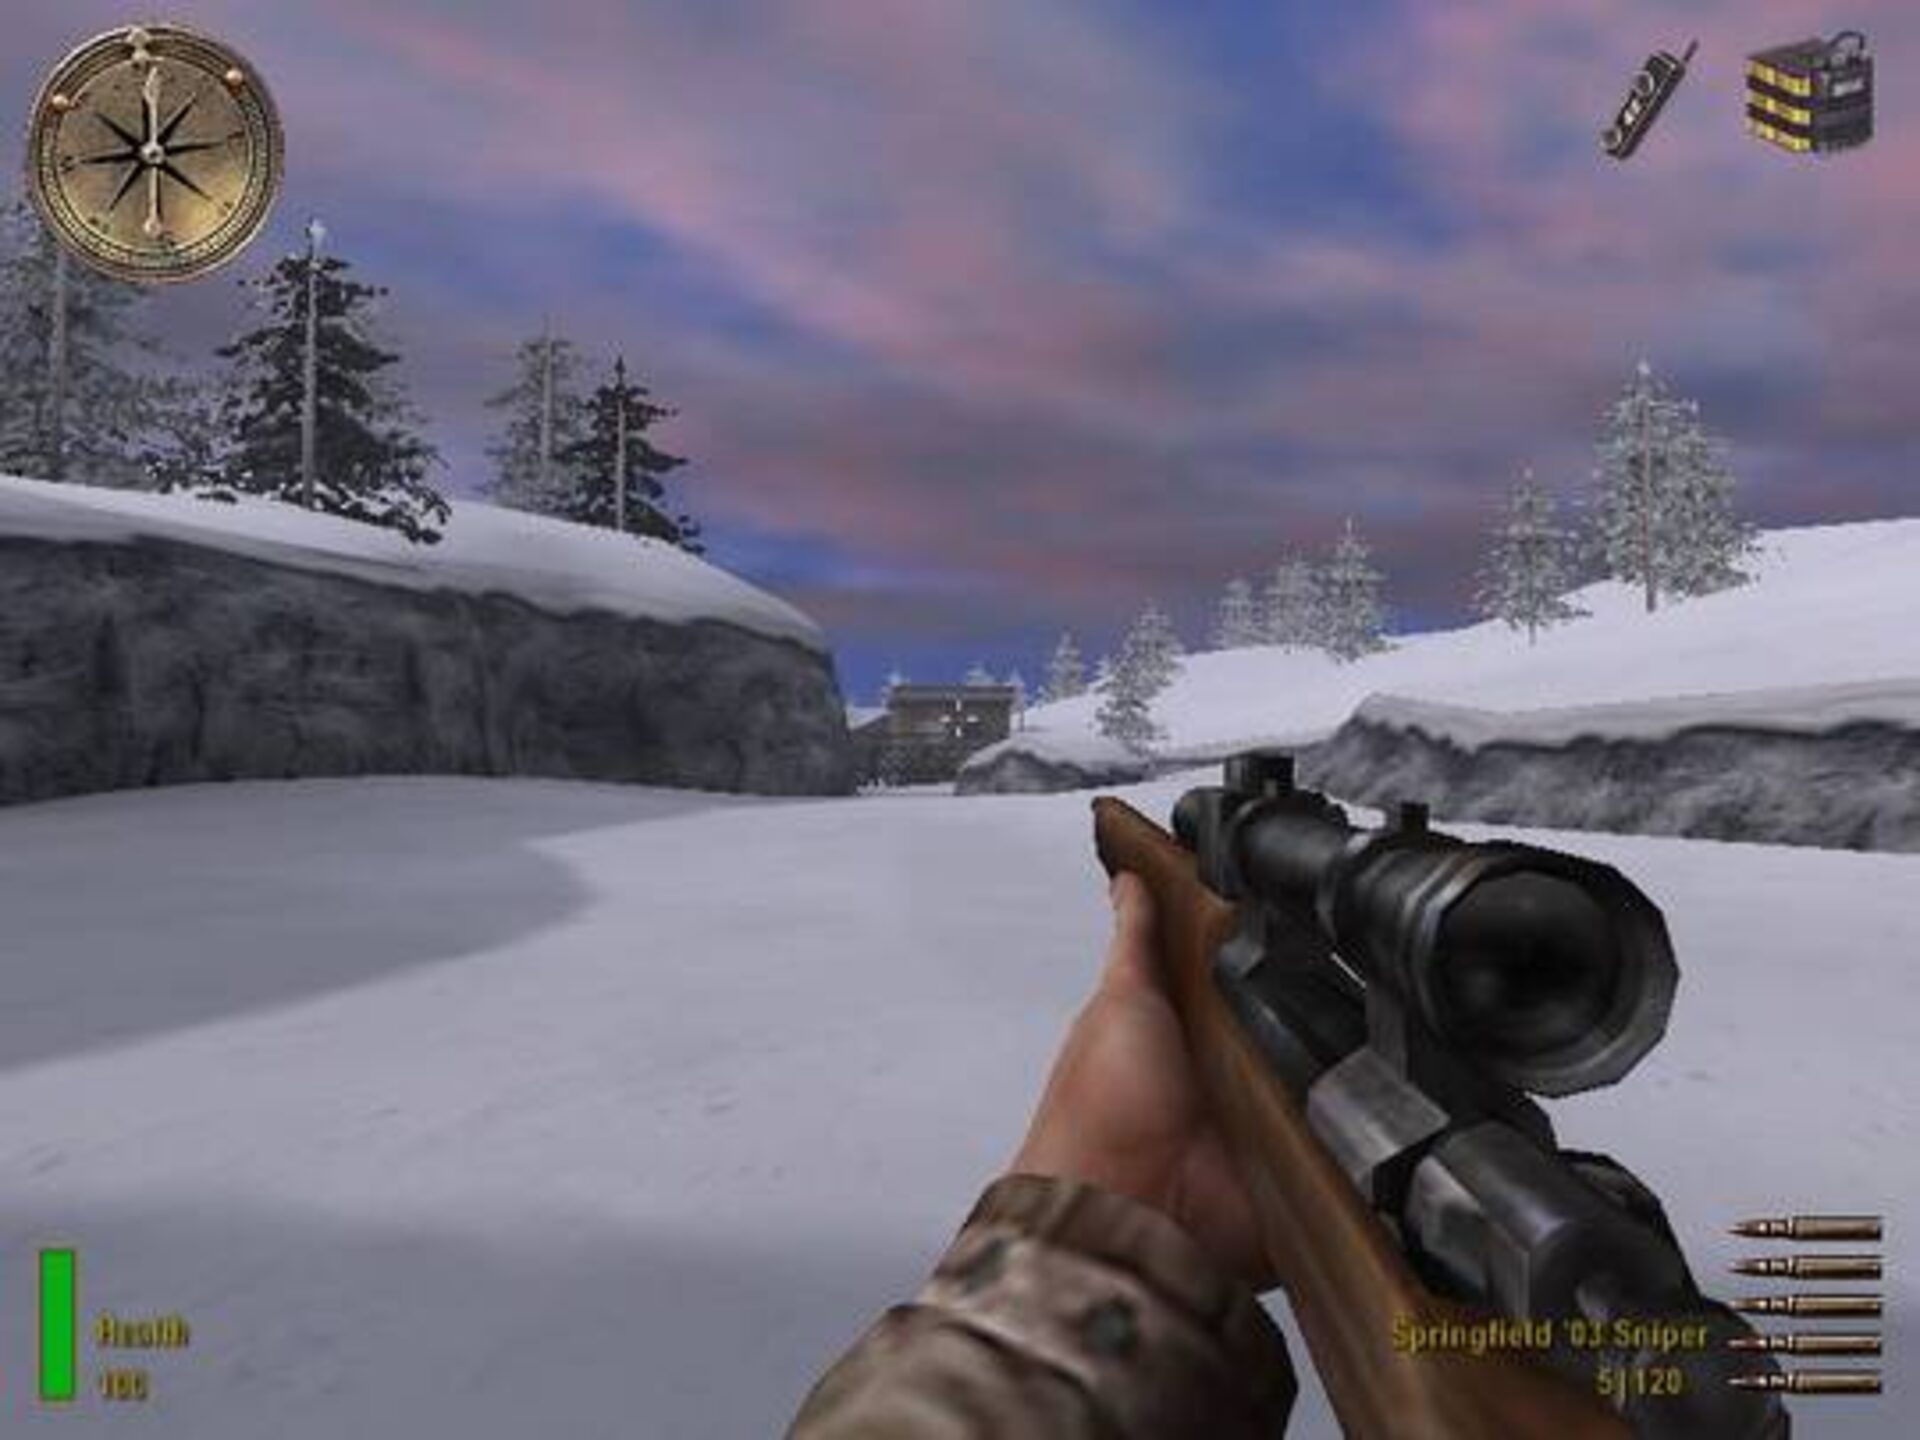 Medal of honor 2002. Medal of Honor: Allied Assault (2002). Medal of Honor Allied Assault. Медаль за отвагу Medal of Honor Allied Assault.